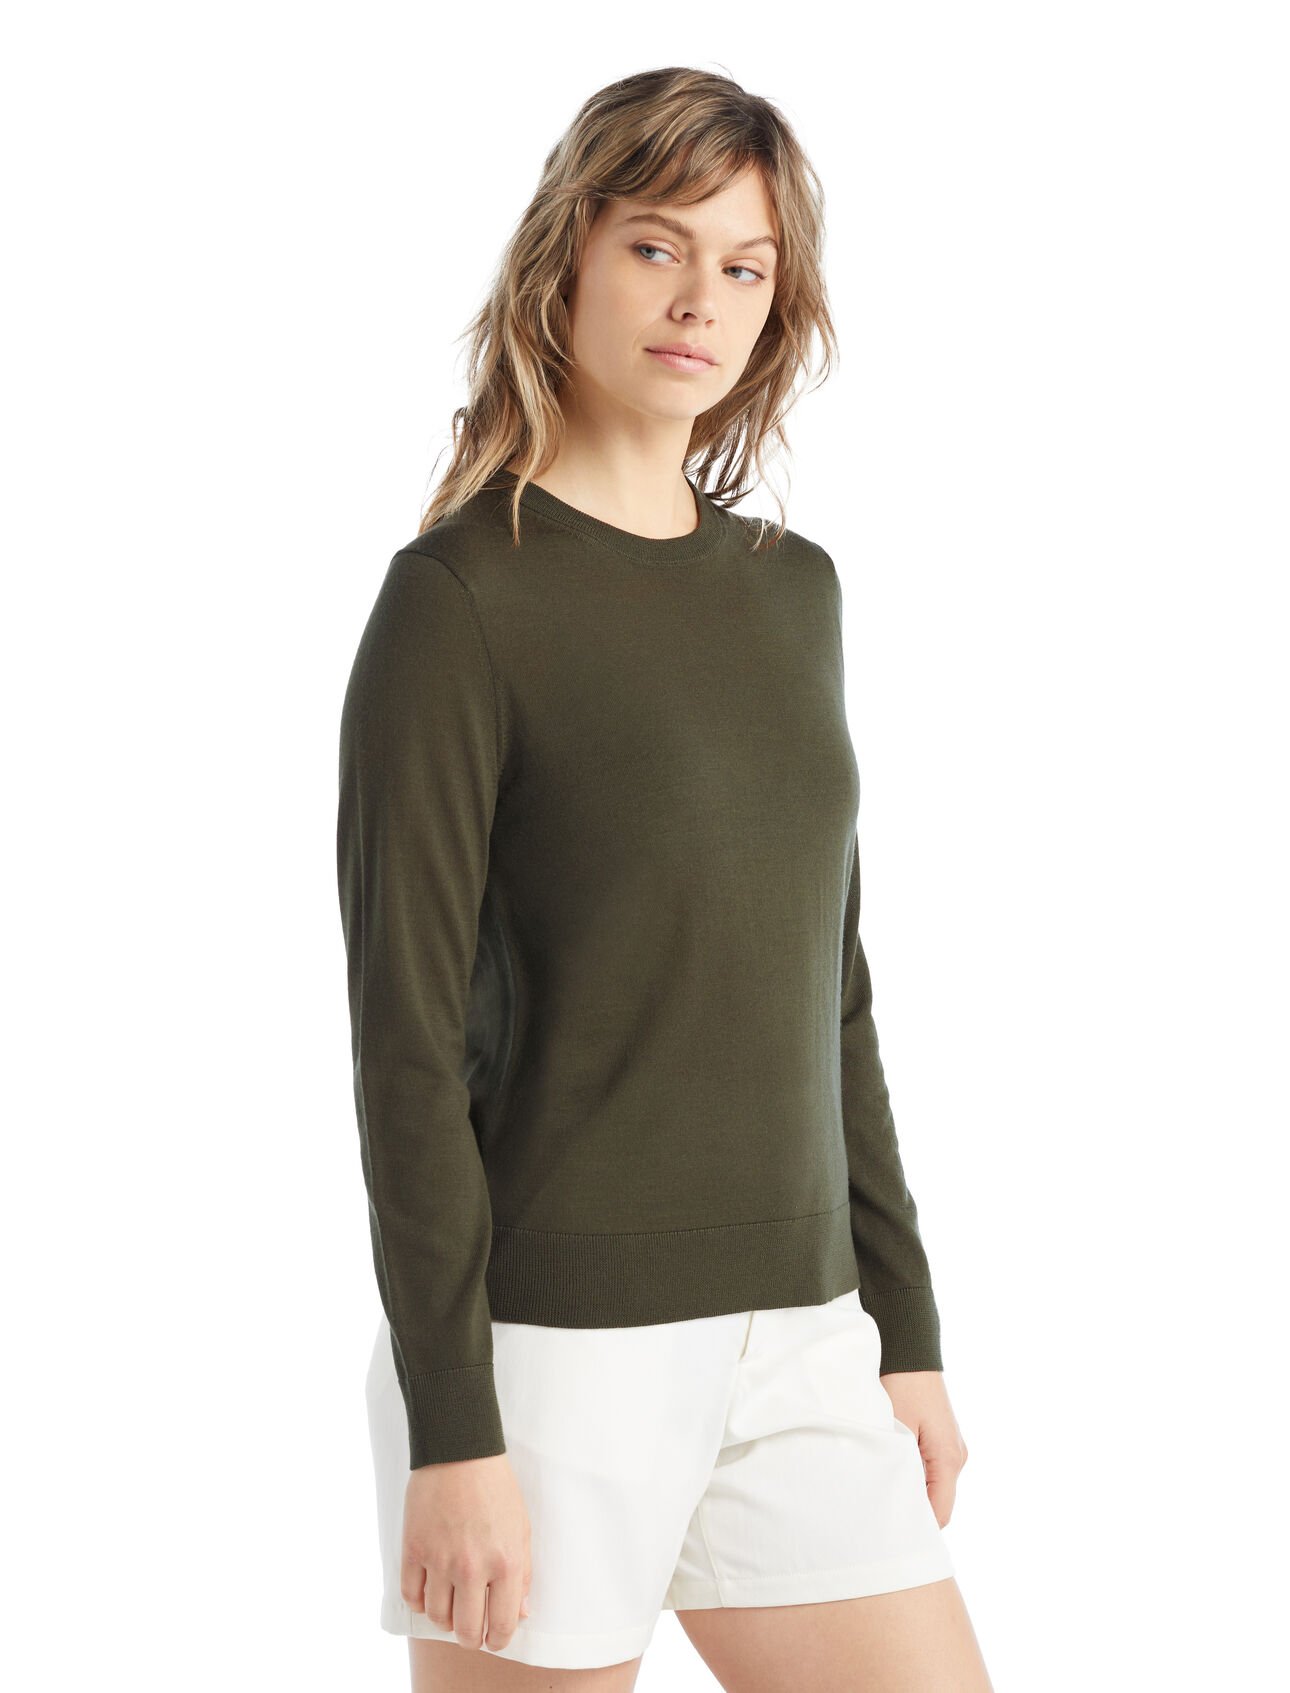 Womens Merino Wilcox Long Sleeve Sweater A classic everyday sweater made with ultra-fine gauge merino wool for unparalleled softness, the Wilcox Long Sleeve Sweater is perfect for days when you need a light extra layer.